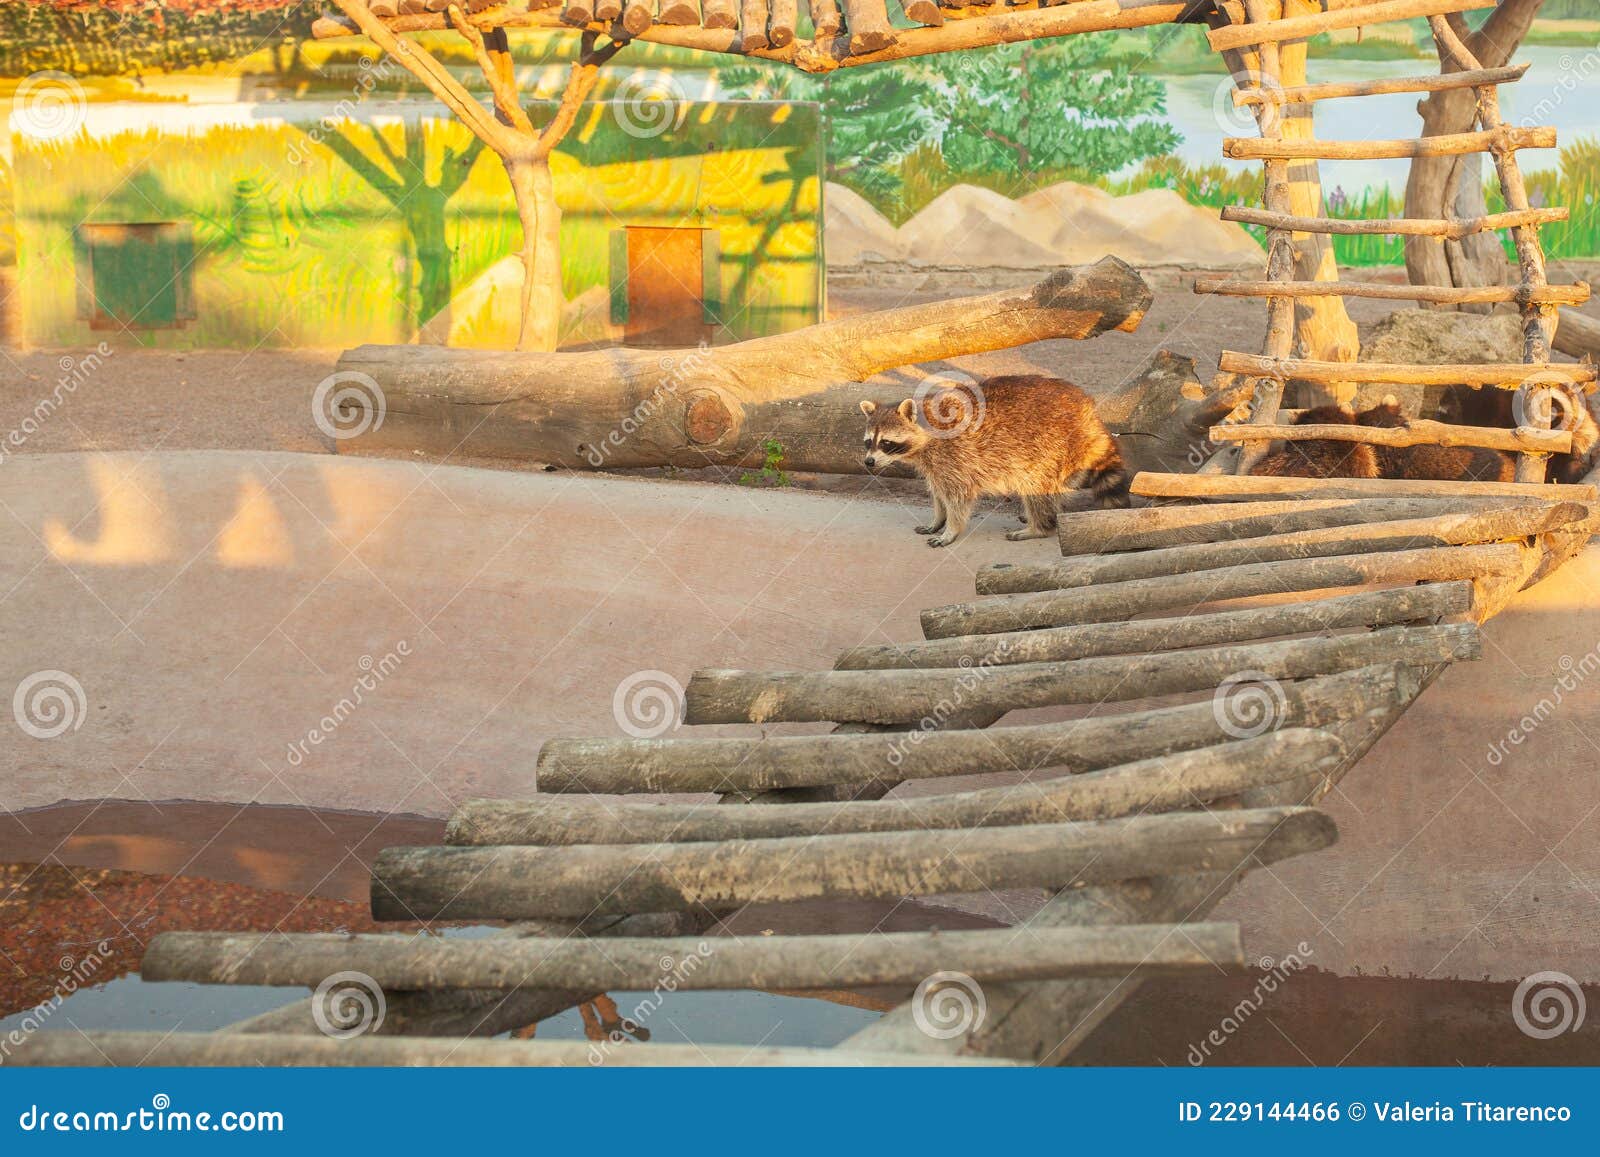 Family of Raccoons in Zoo, Biopark, Animal House, Good Conditions,  Beautiful Aviary, Well-groomed Animals Stock Photo - Image of predator,  curiosity: 229144466